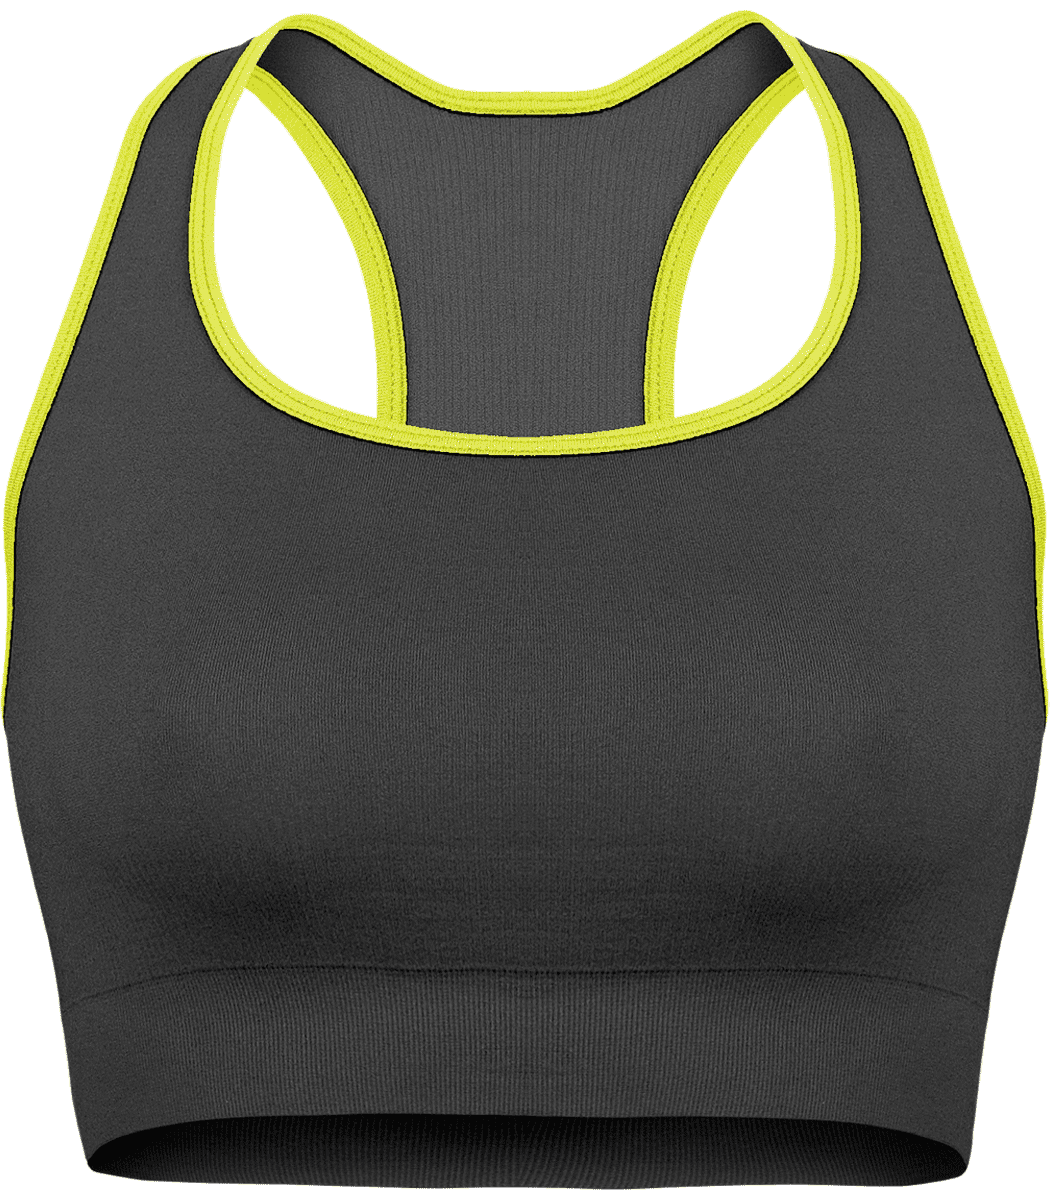 Printed Sports Bra | Seamless | Supportive And Feminine Storm Grey / Fluorescent Yellow